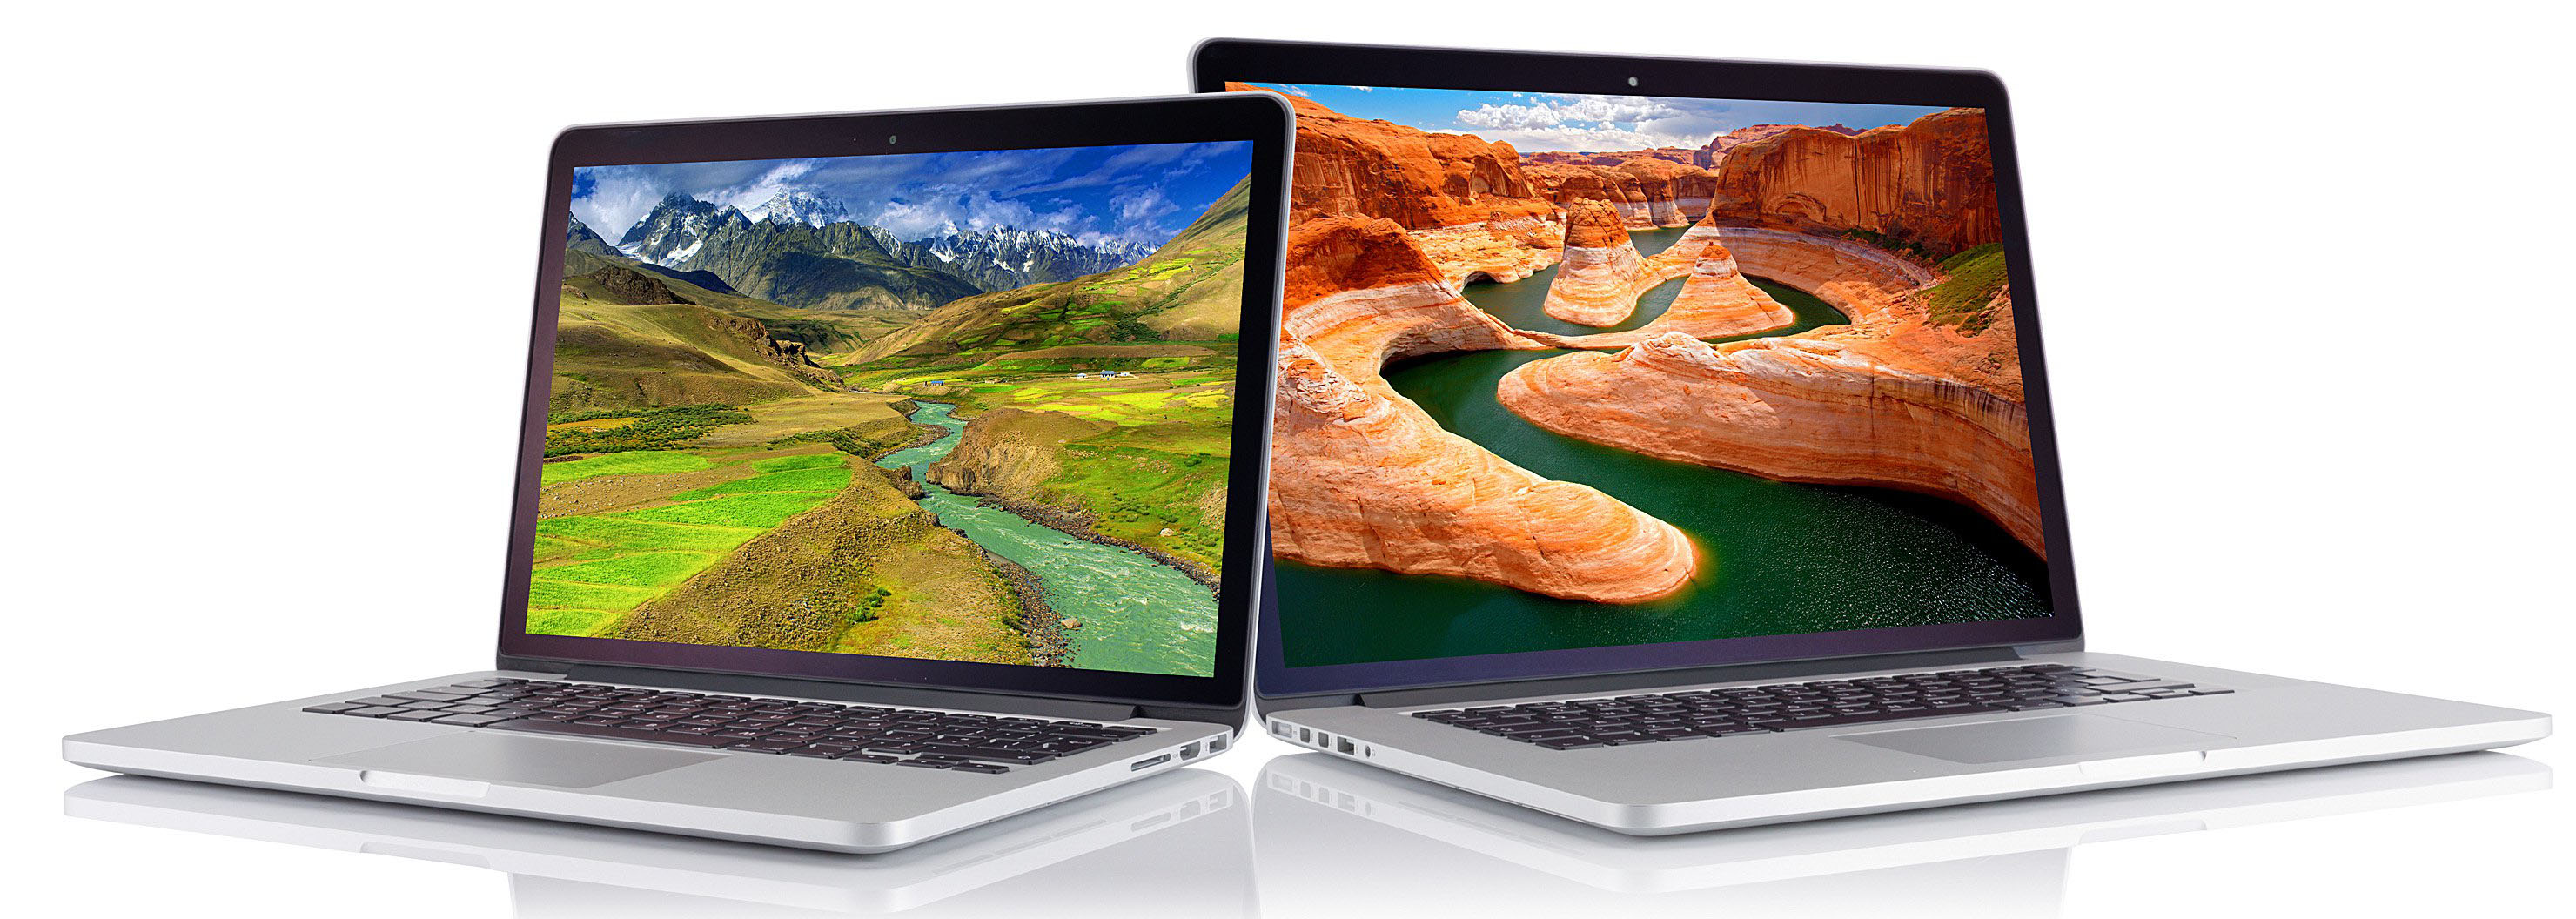 Apple MacBook Pro 13 (Early 2015) - Specs, Tests, and Prices 